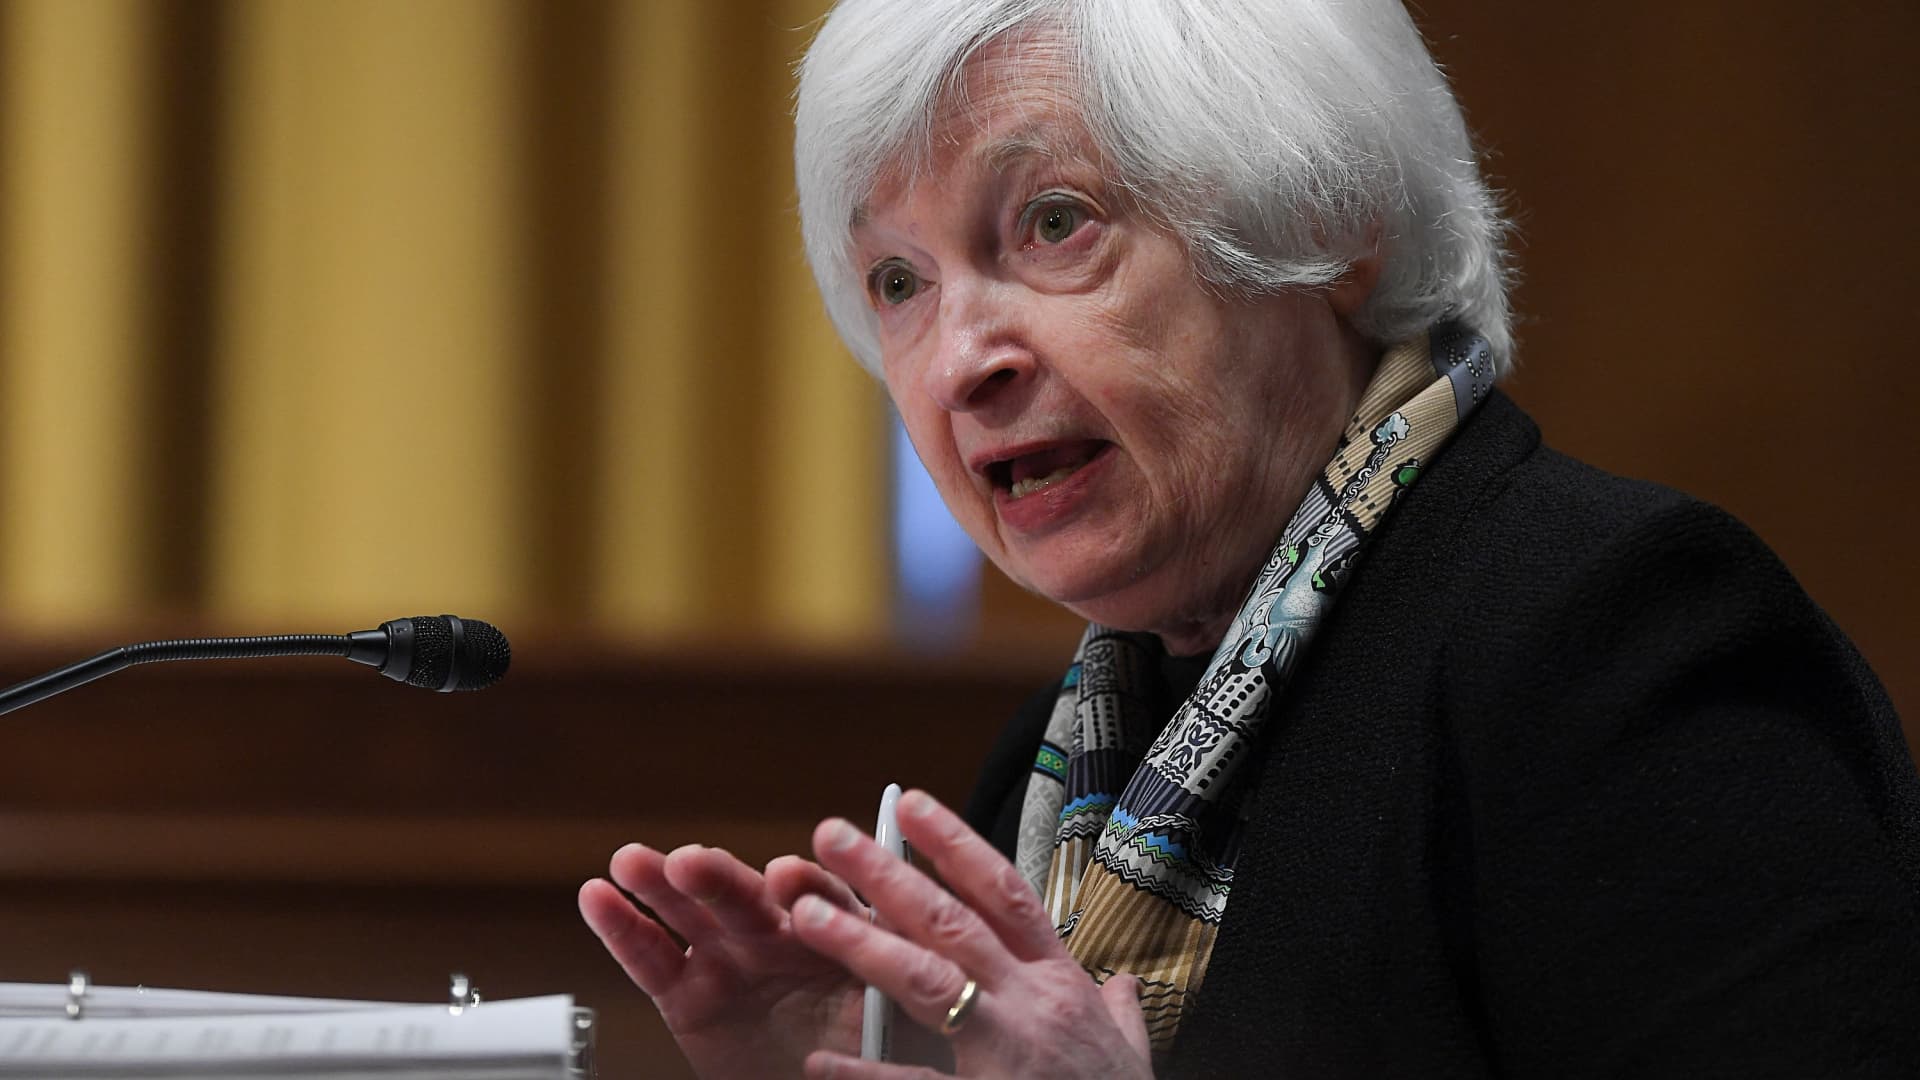 Failure to raise debt ceiling would be an 'economic catastrophe,' Treasury's Yellen says